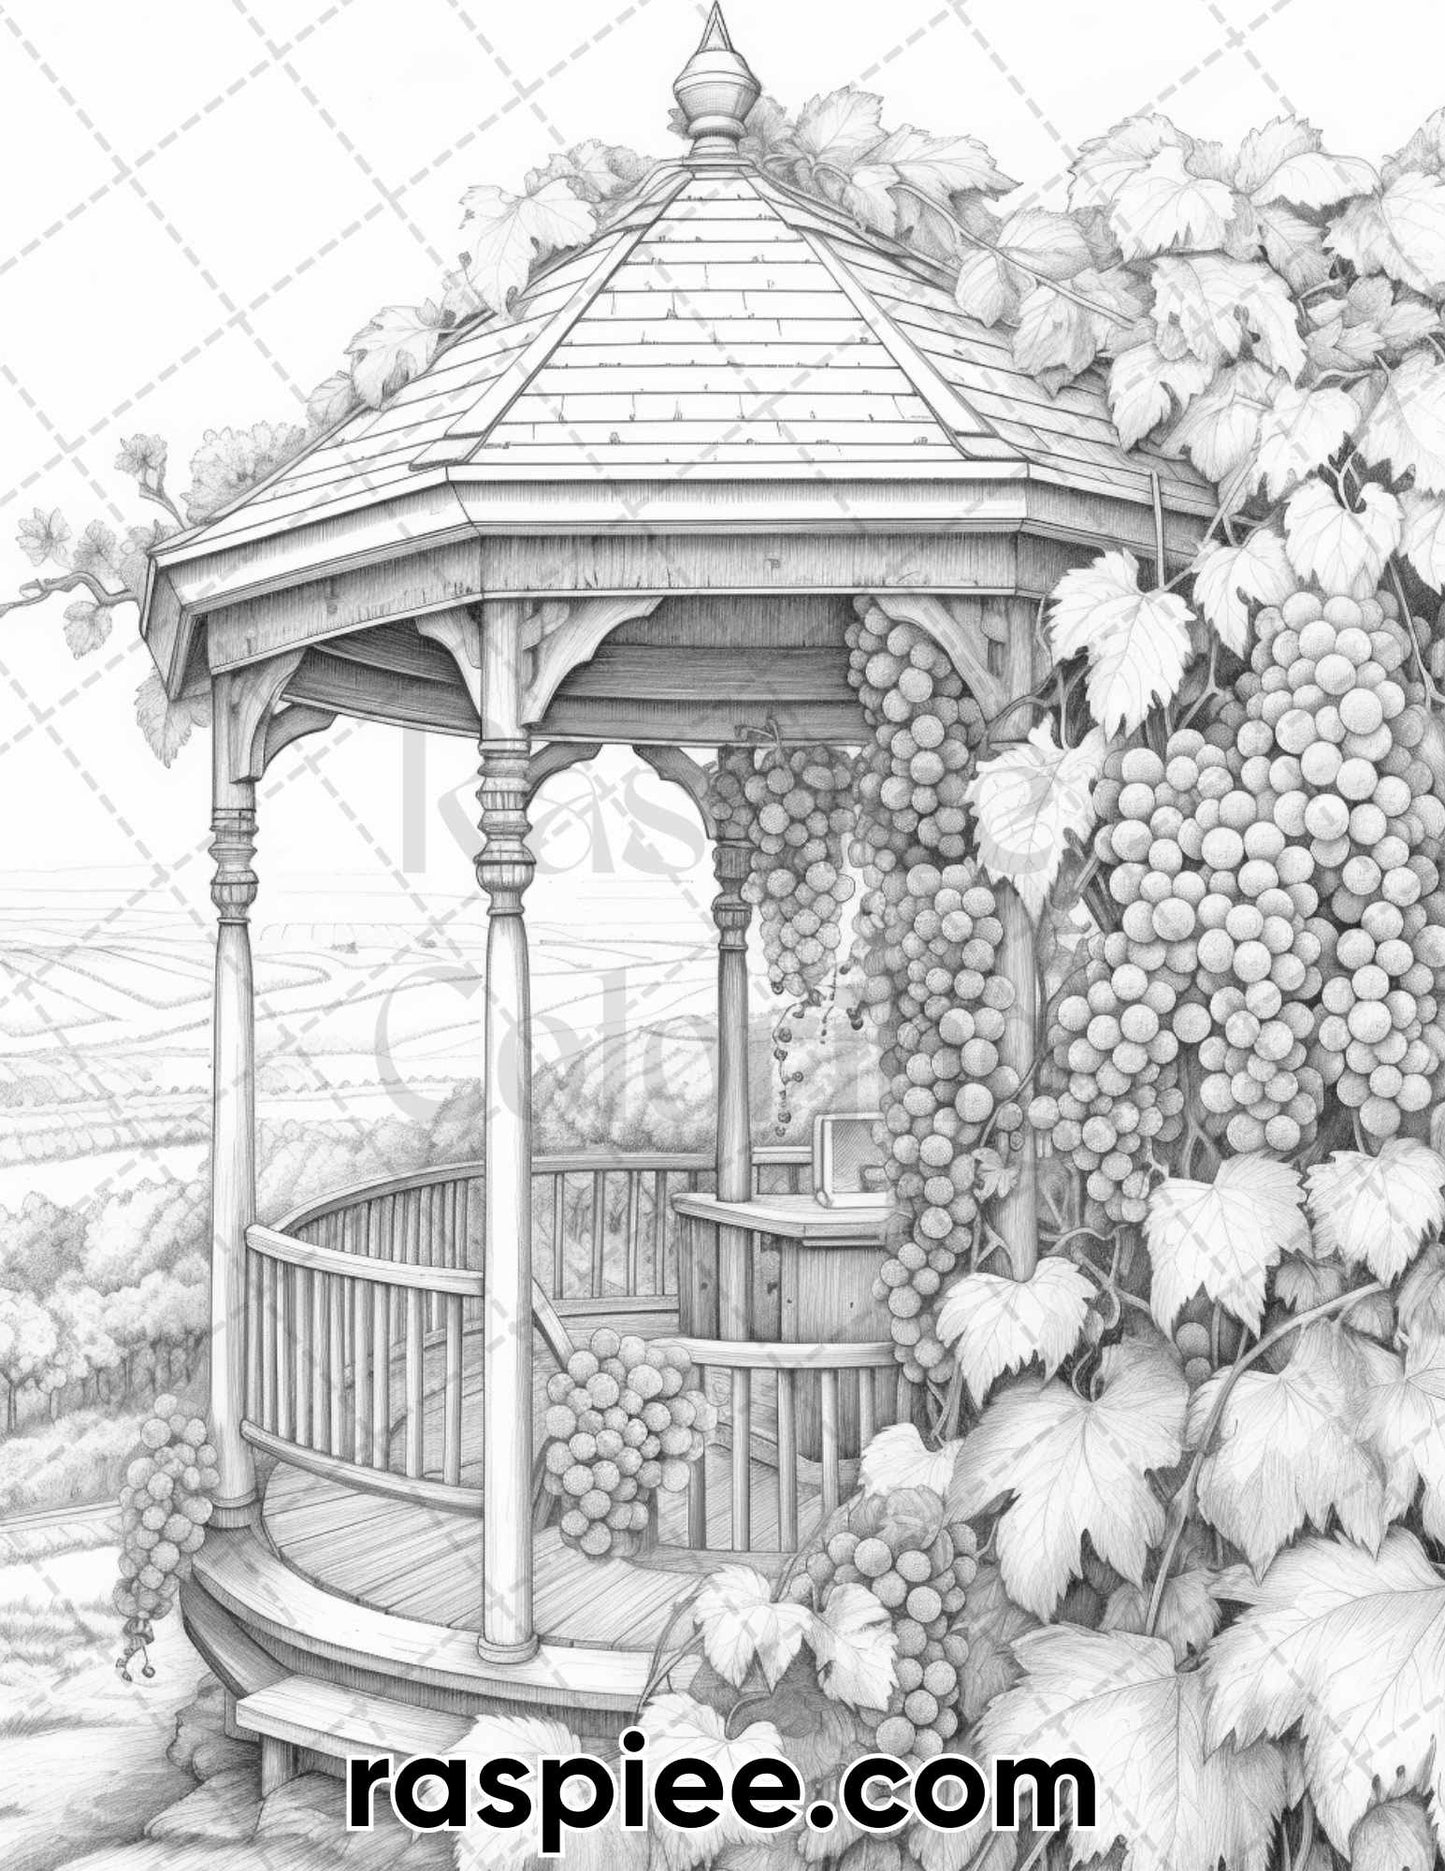 adult coloring pages, adult coloring sheets, adult coloring book pdf, adult coloring book printable, grayscale coloring pages, grayscale coloring books, spring coloring pages for adults, spring coloring book pdf, landscapes coloring pages, spring vineyard coloring pages